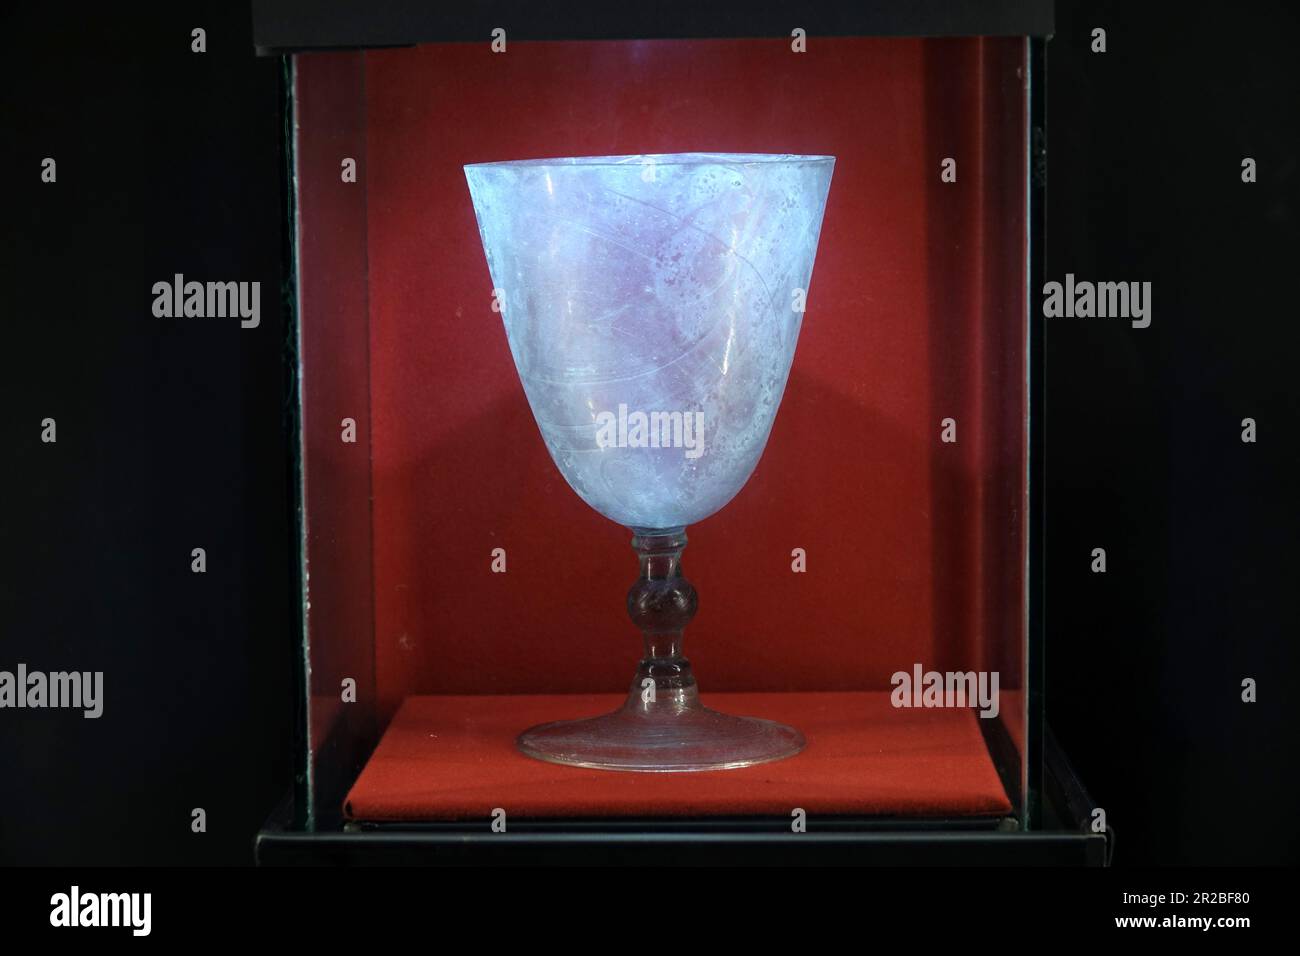 Close-up image of the glass chalice found in Berceto Cathedral that may be the Holy Grail (Saint Graal, Graal, Greal). Berceto, Parma, Emilia Romagna, Stock Photo